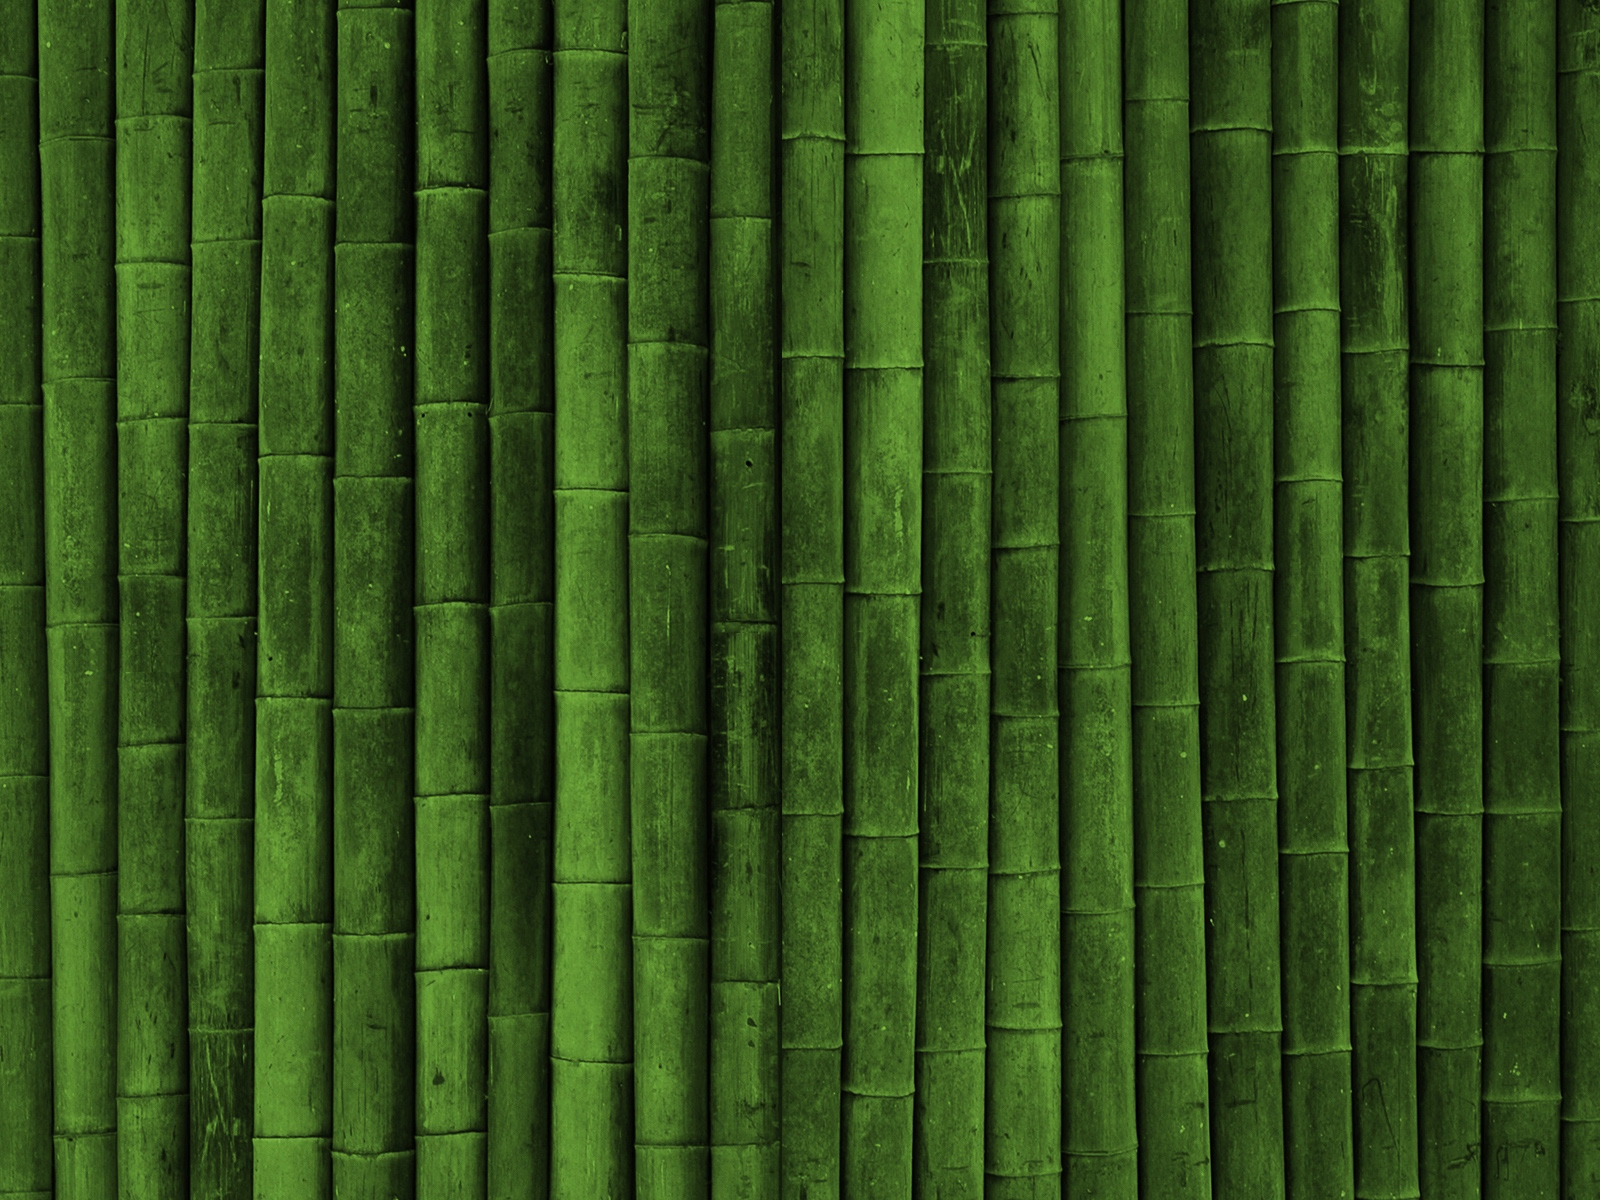 Bamboo for 1600 x 1200 resolution